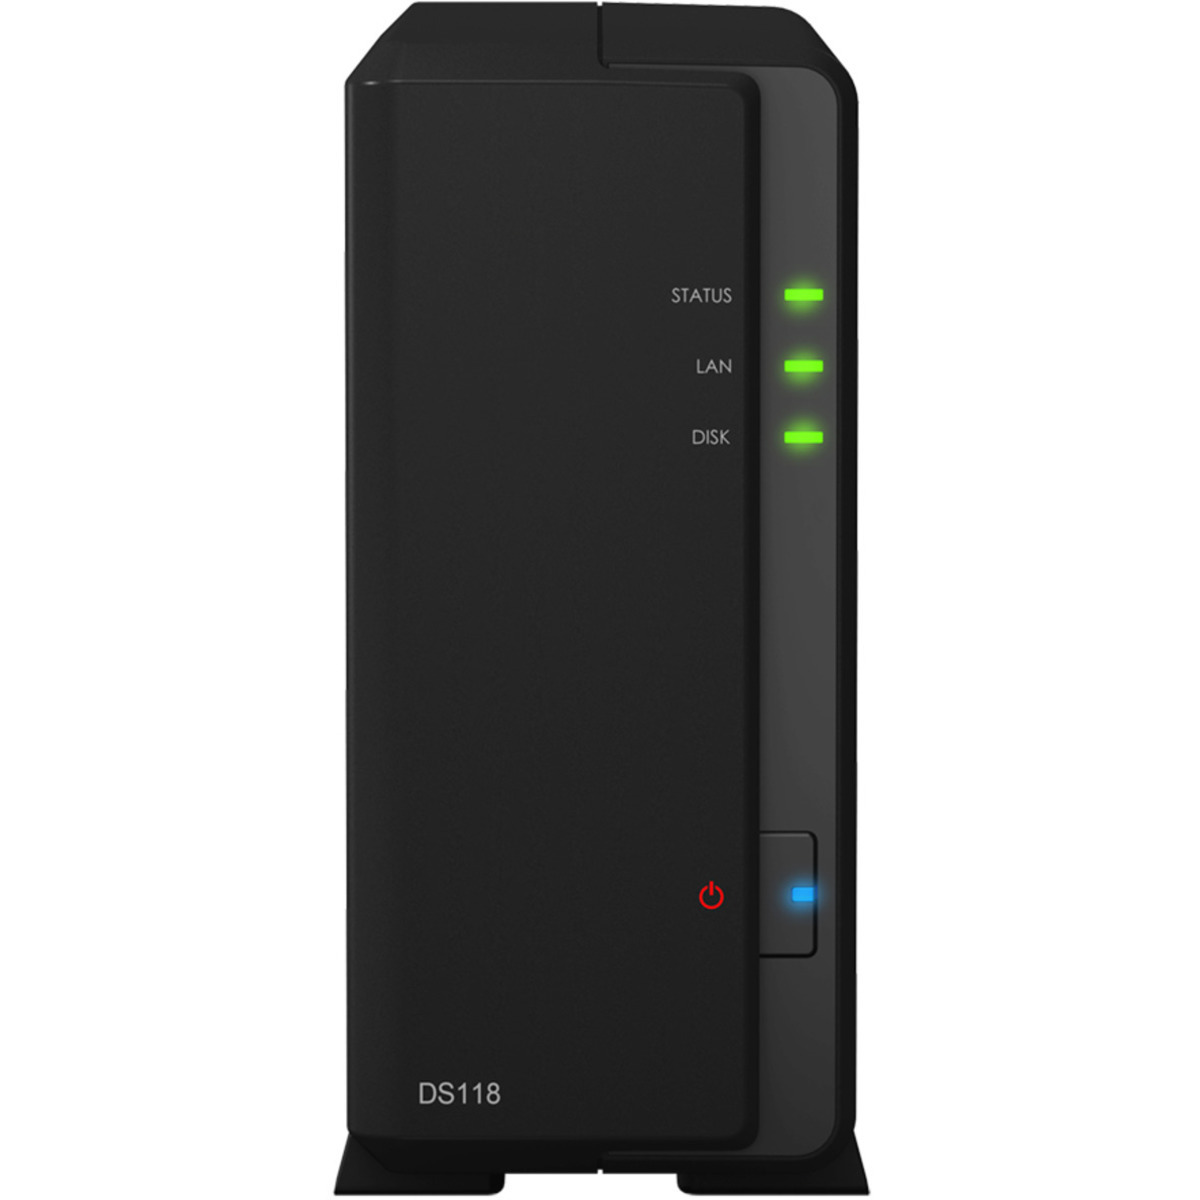 buy $353 Synology DiskStation DS118 4tb Desktop NAS - Network Attached Storage Device 1x4000gb Western Digital Blue WD40EZRZ 3.5 5400rpm SATA 6Gb/s HDD CONSUMER Class Drives Installed - Burn-In Tested - nas headquarters buy network attached storage server device das new raid-5 free shipping usa christmas new year holiday sale DiskStation DS118